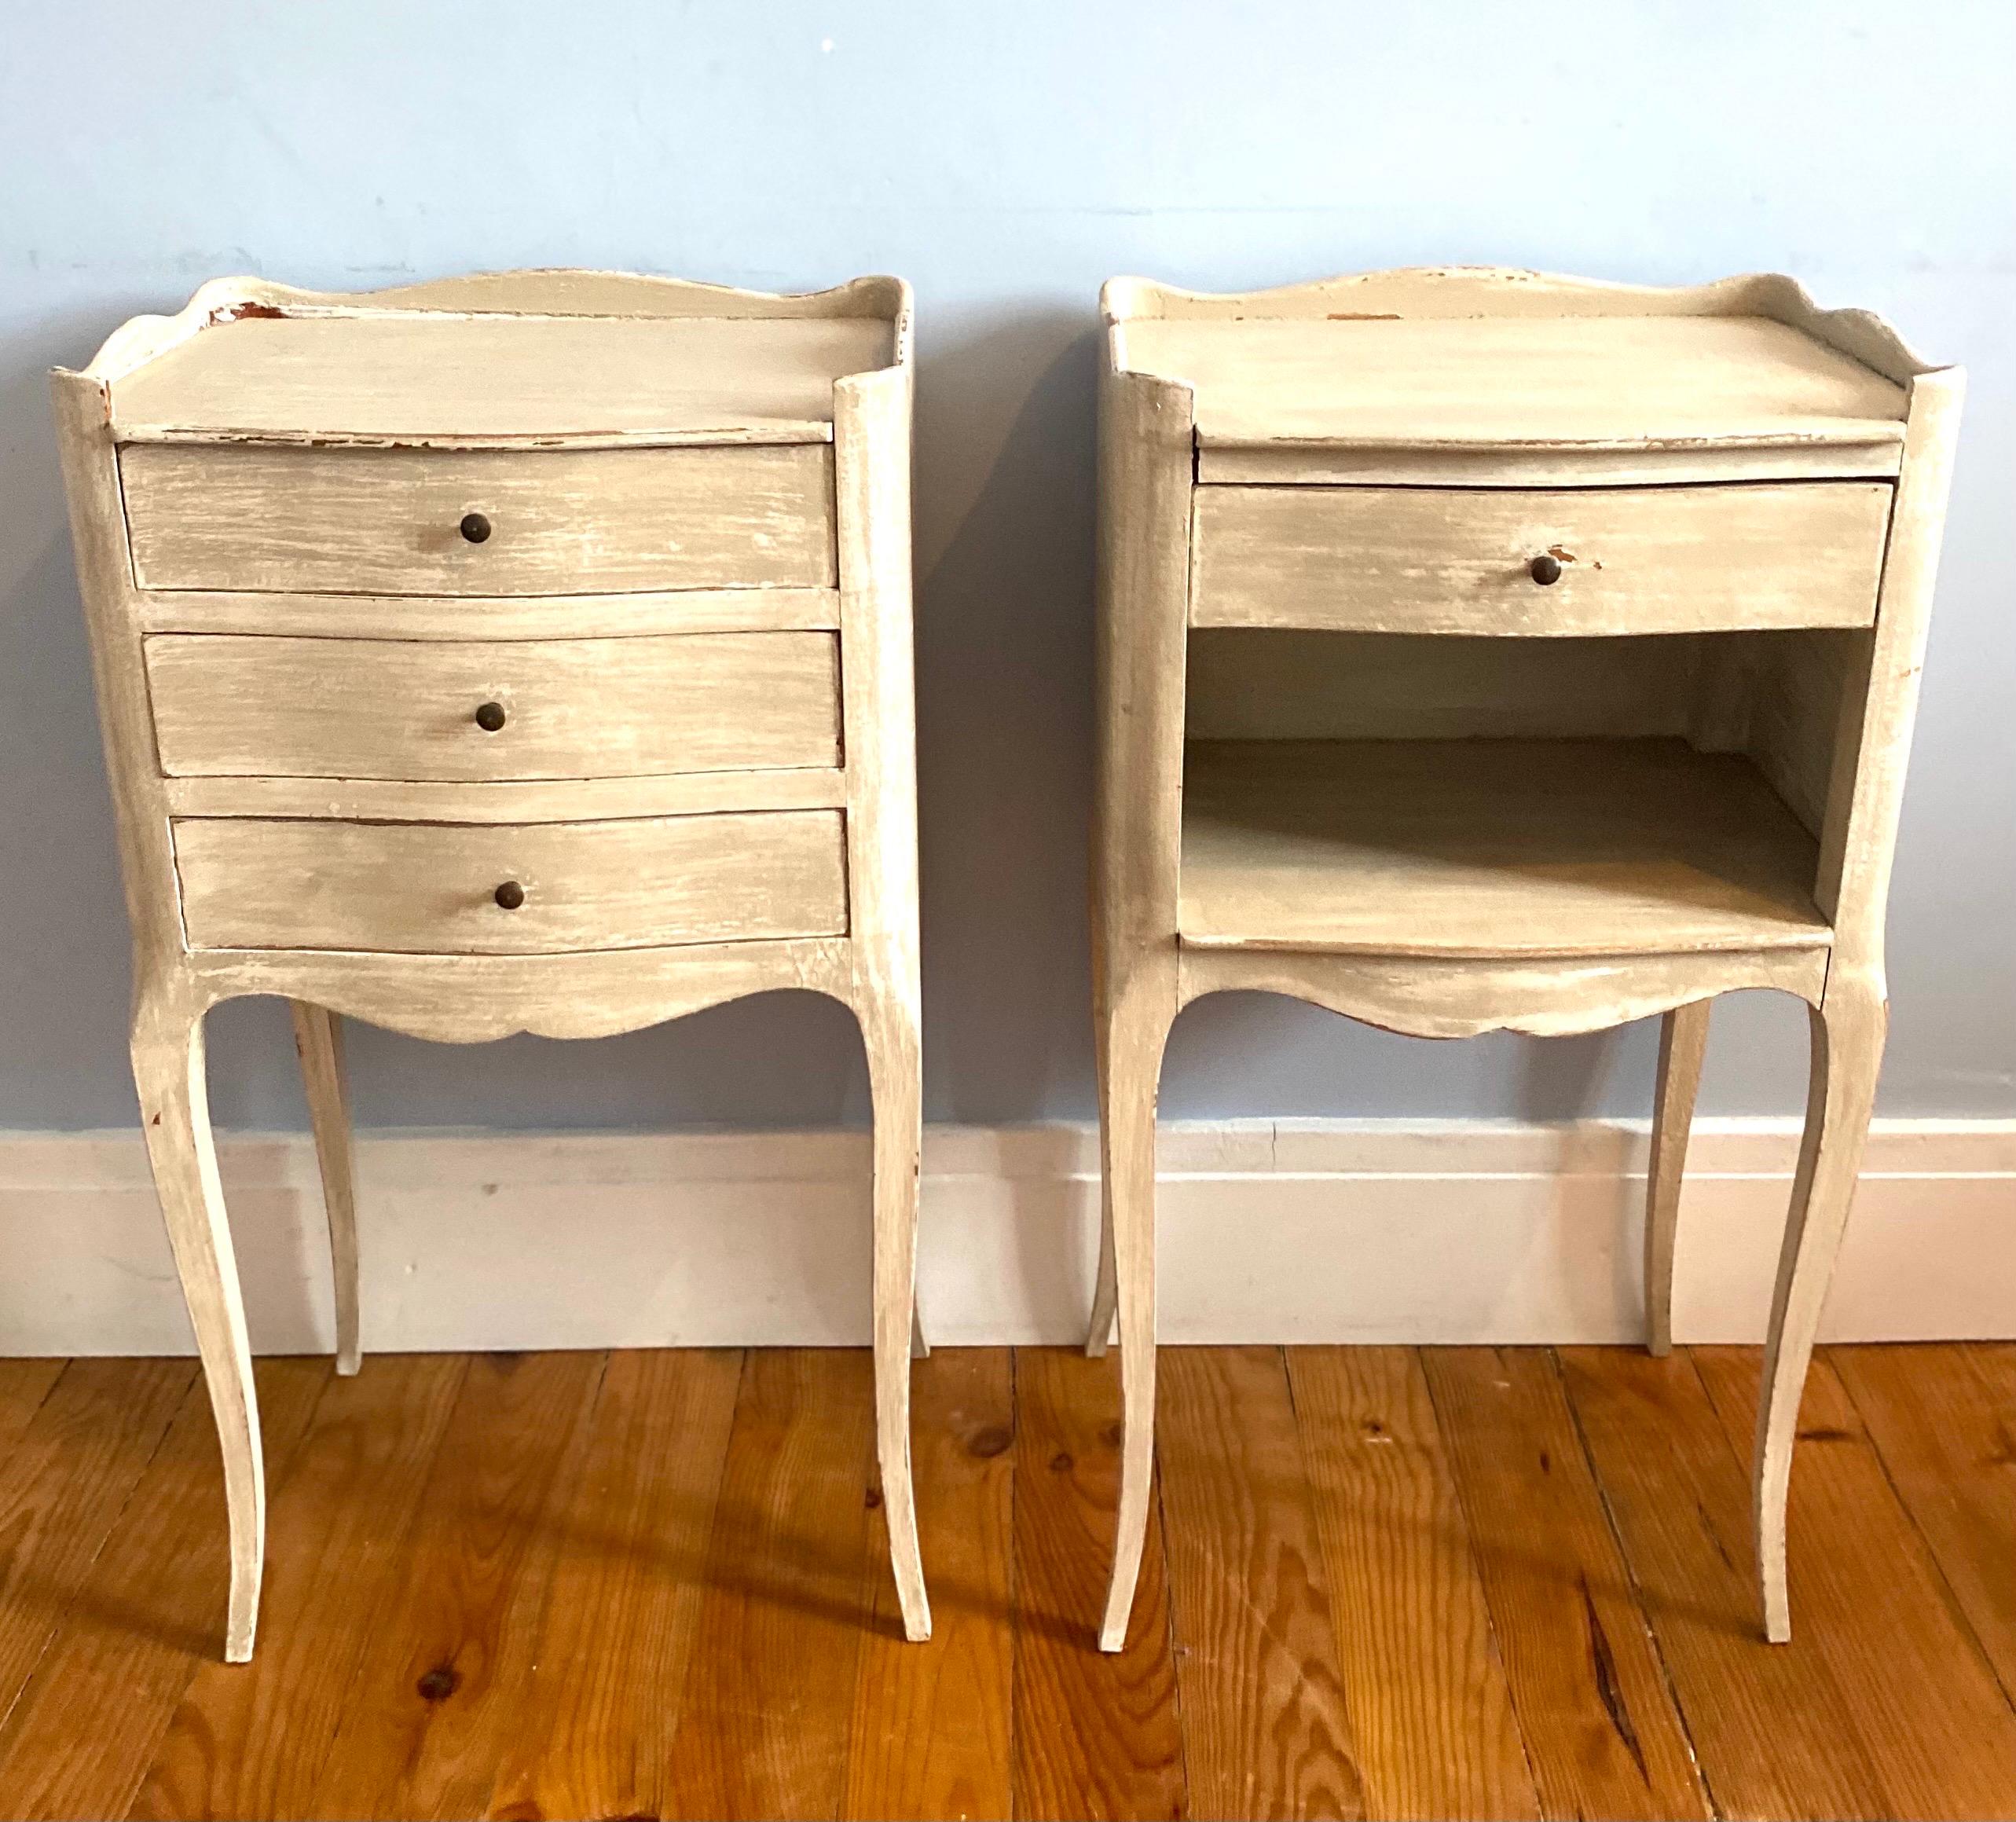 Very nice pair of gray patina bedside tables in the Louis XV style. 
The legs are slightly curved.
One of the table is composed of three drawers that open and the other is composed of one drawer and a niche.
Circa 1950 - France

The Louis XV style